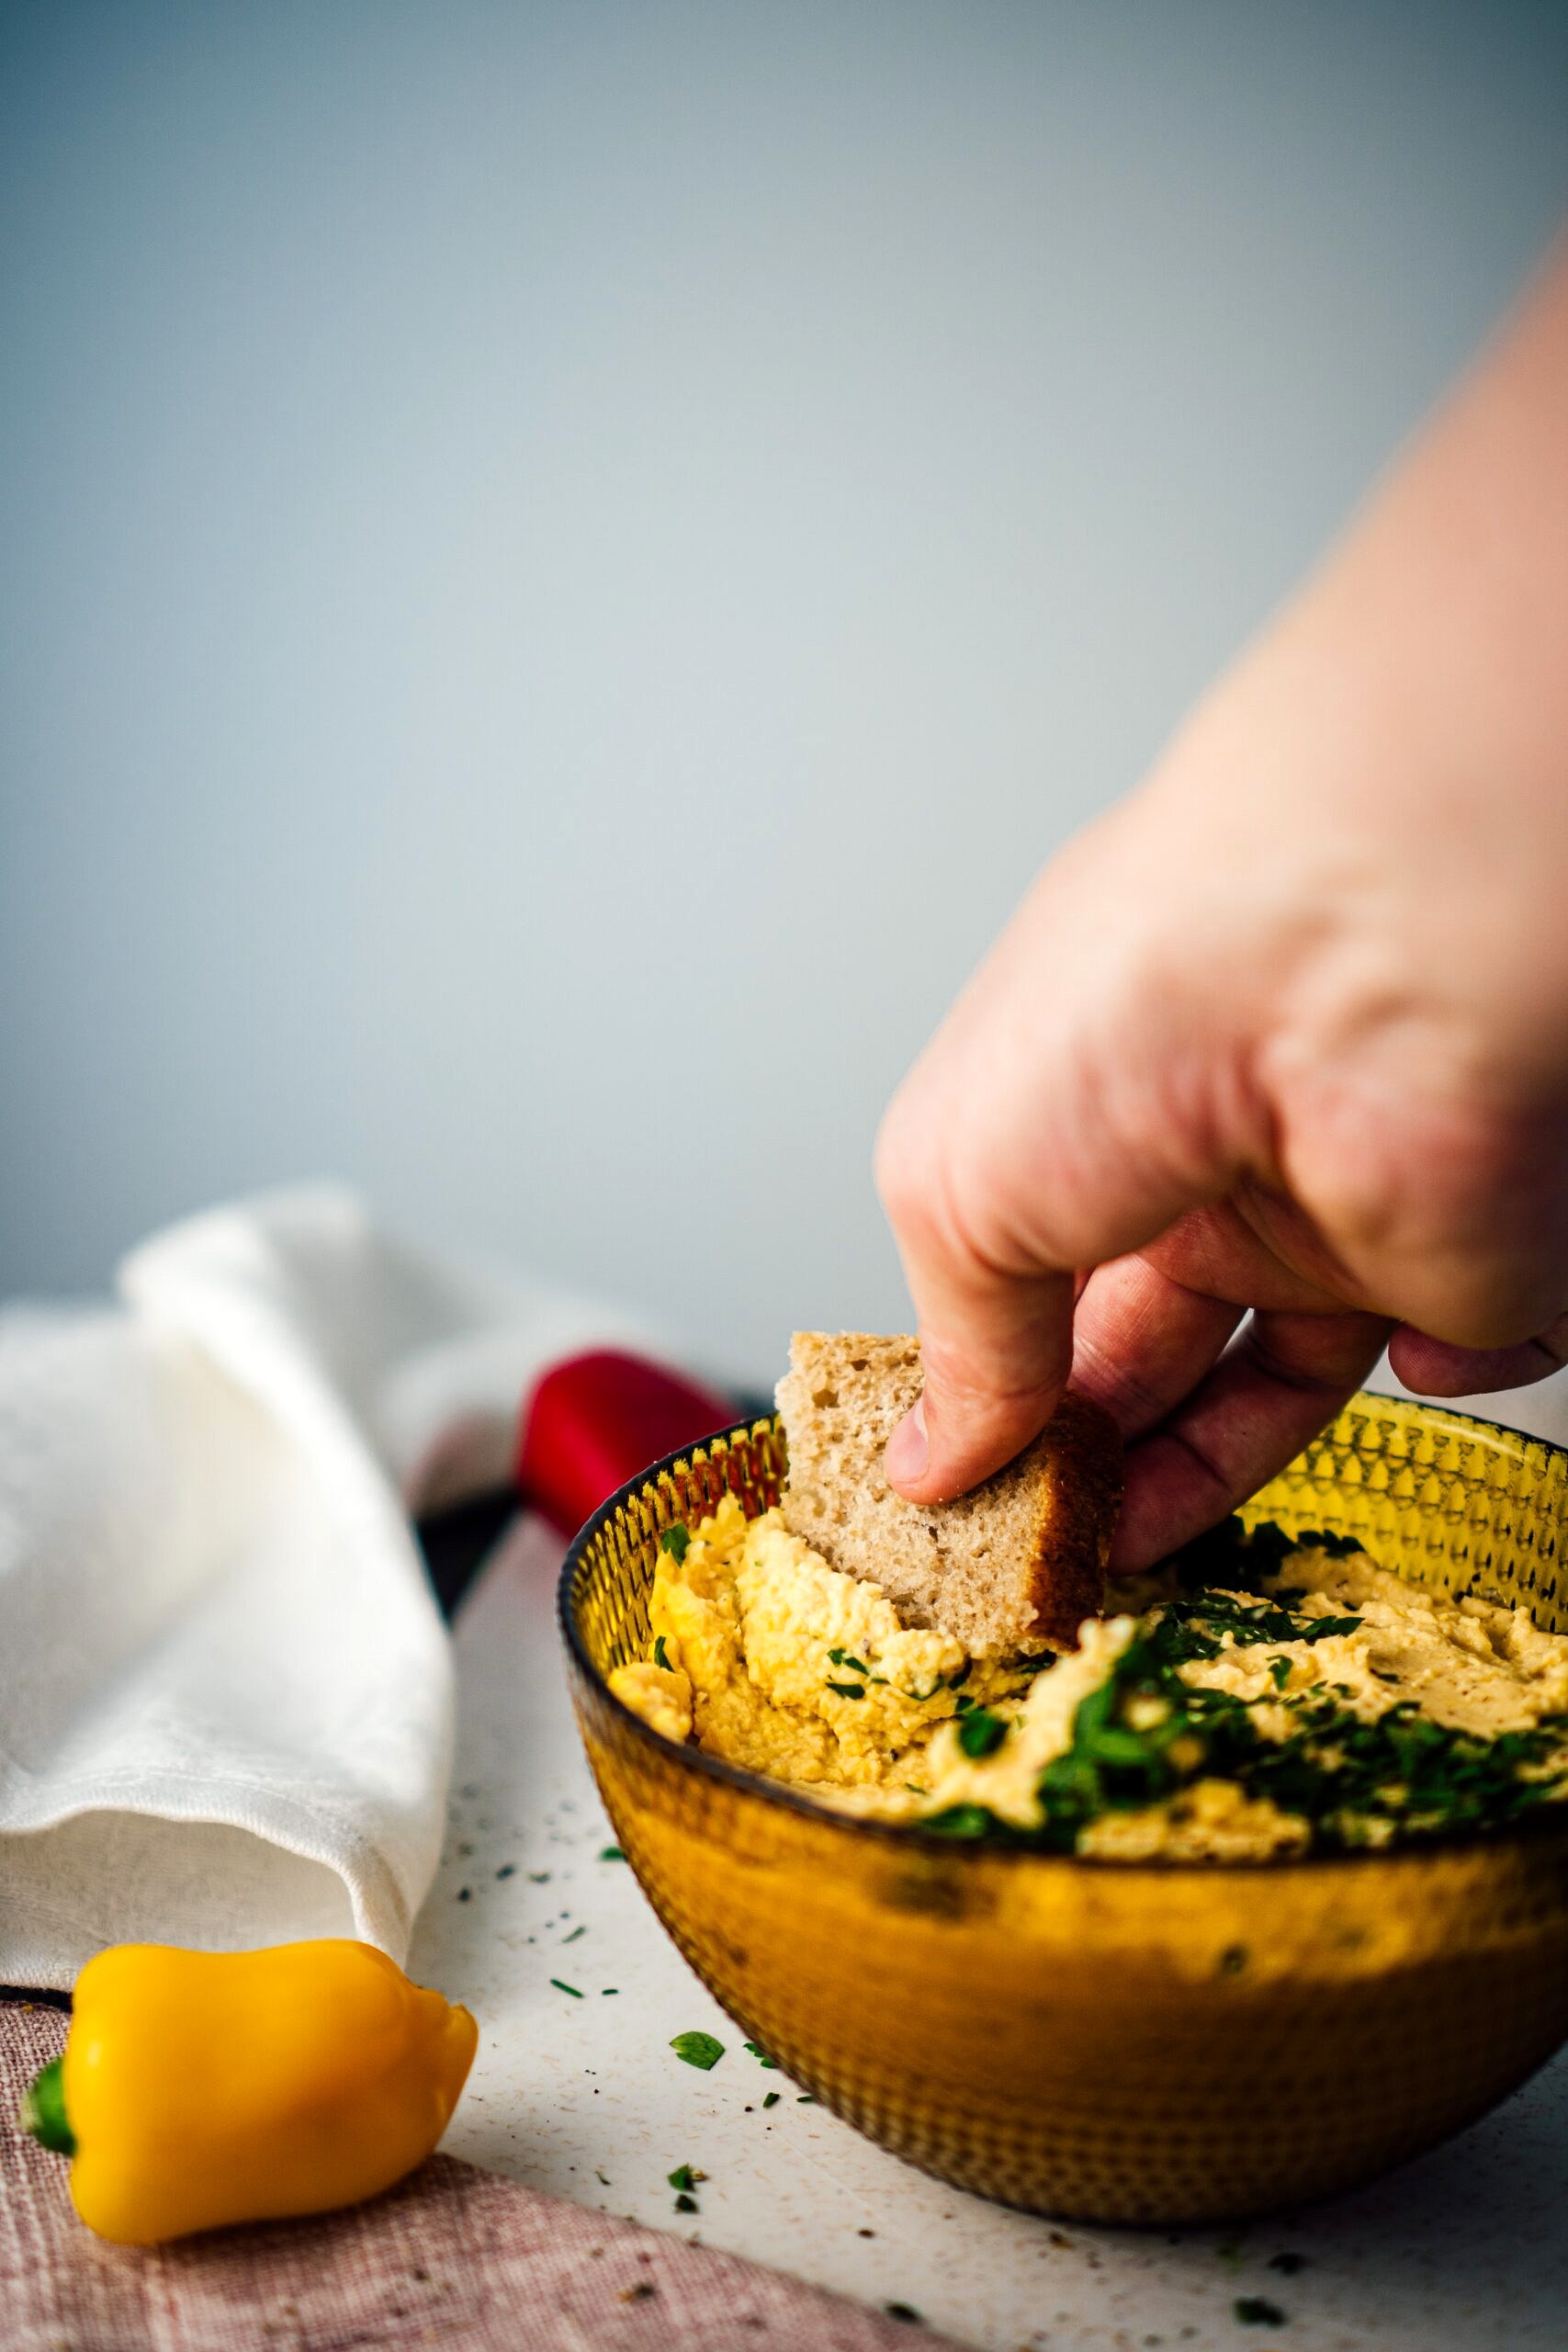 Hand dipping bread into a dip.